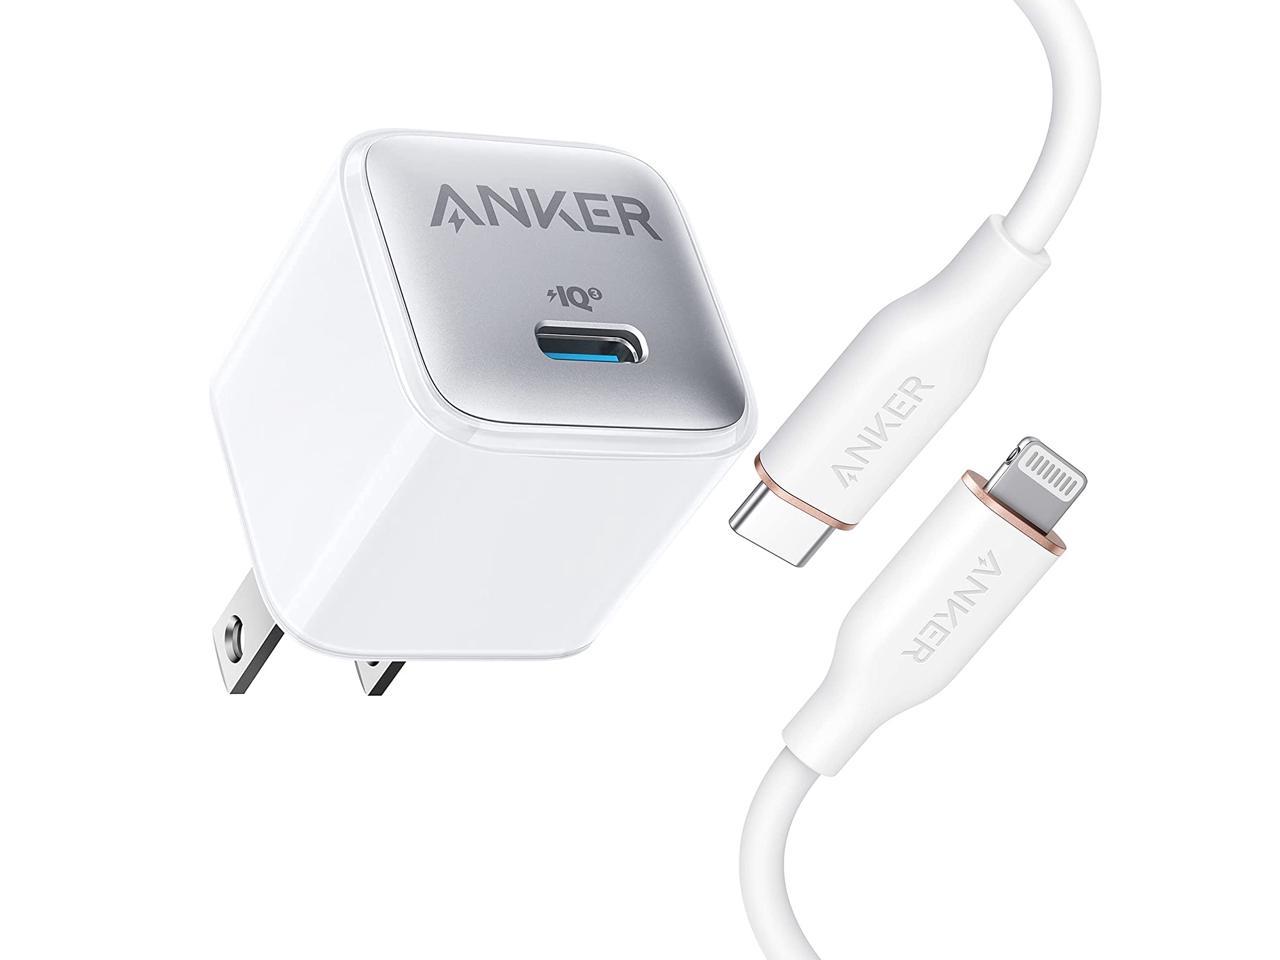 Anker 511 Charger (Nano Pro) 20W USB C Charger + Powerline III Flow USB C to Lightning Cable (3ft) Bundle $27